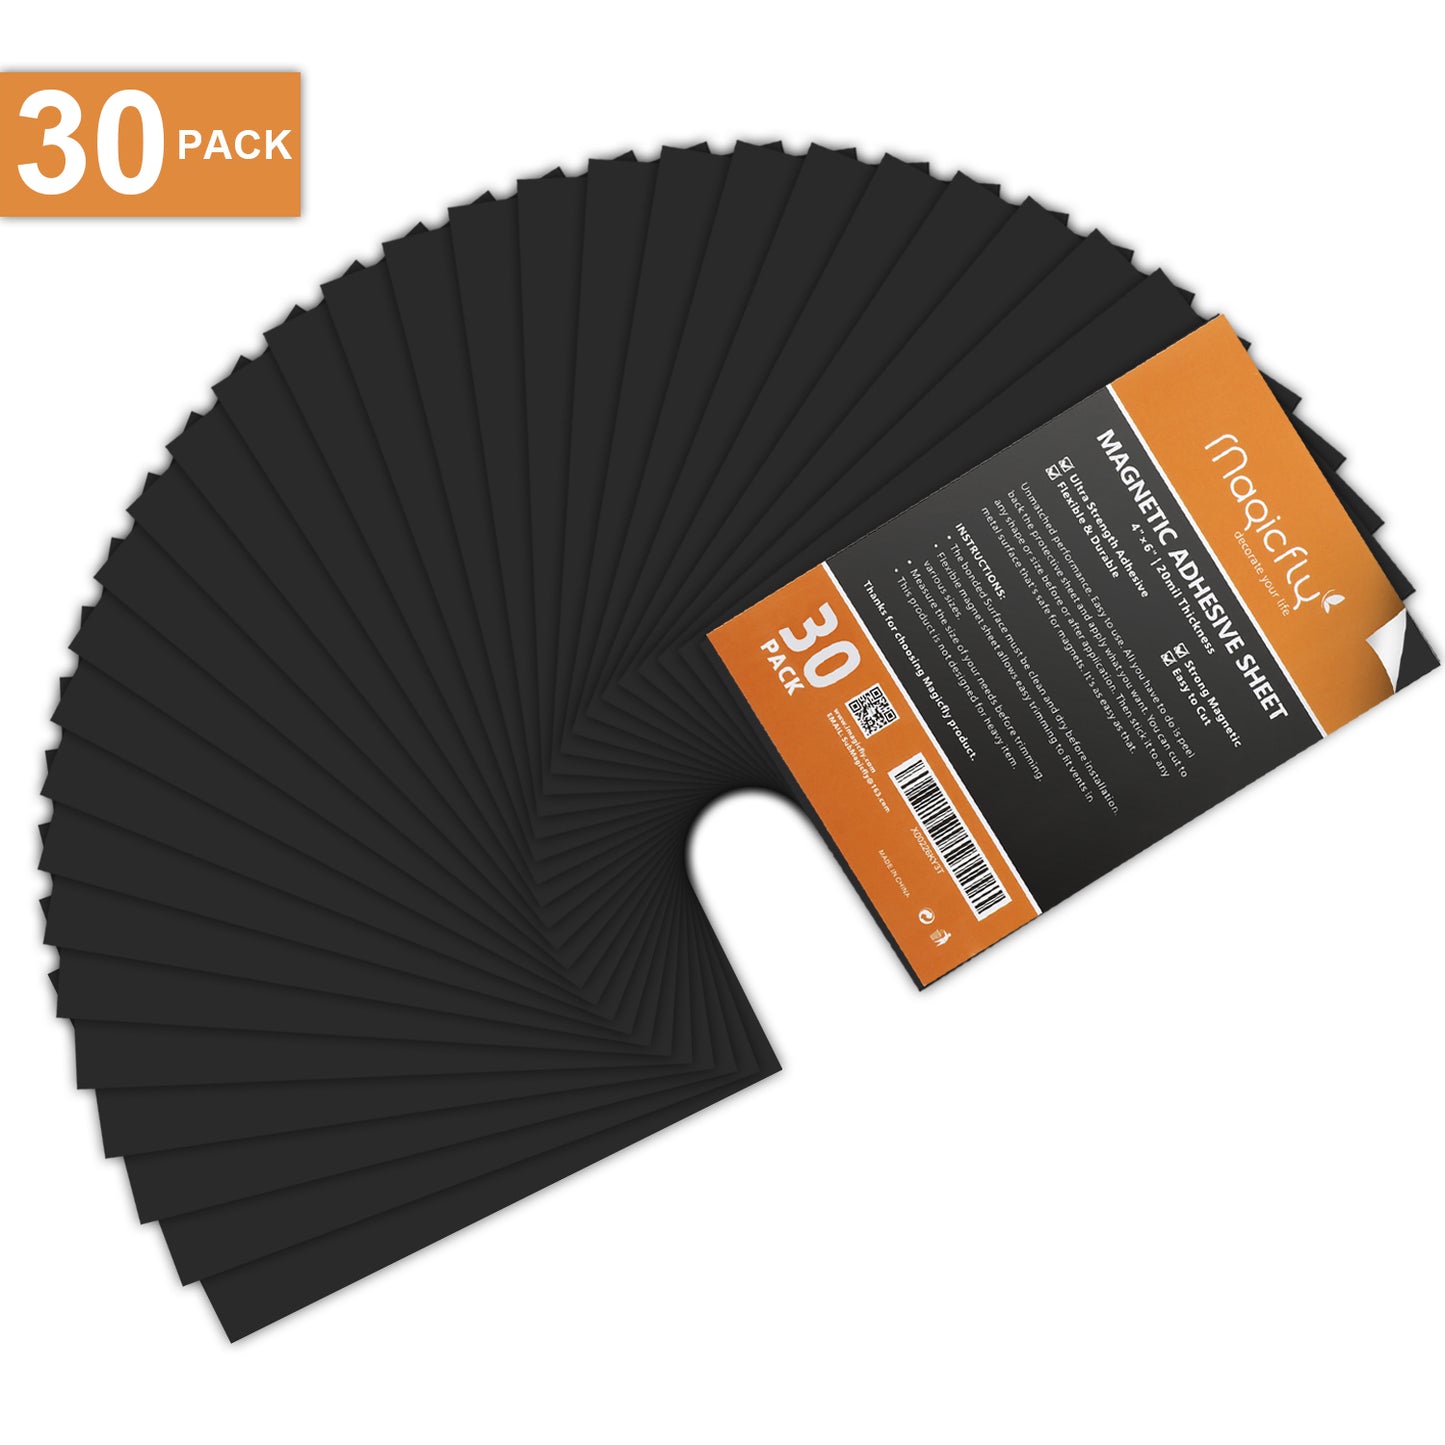 Magicfly Flexible Magnet Sheets with Adhesive 8 X 10 Inch, Pack of 30